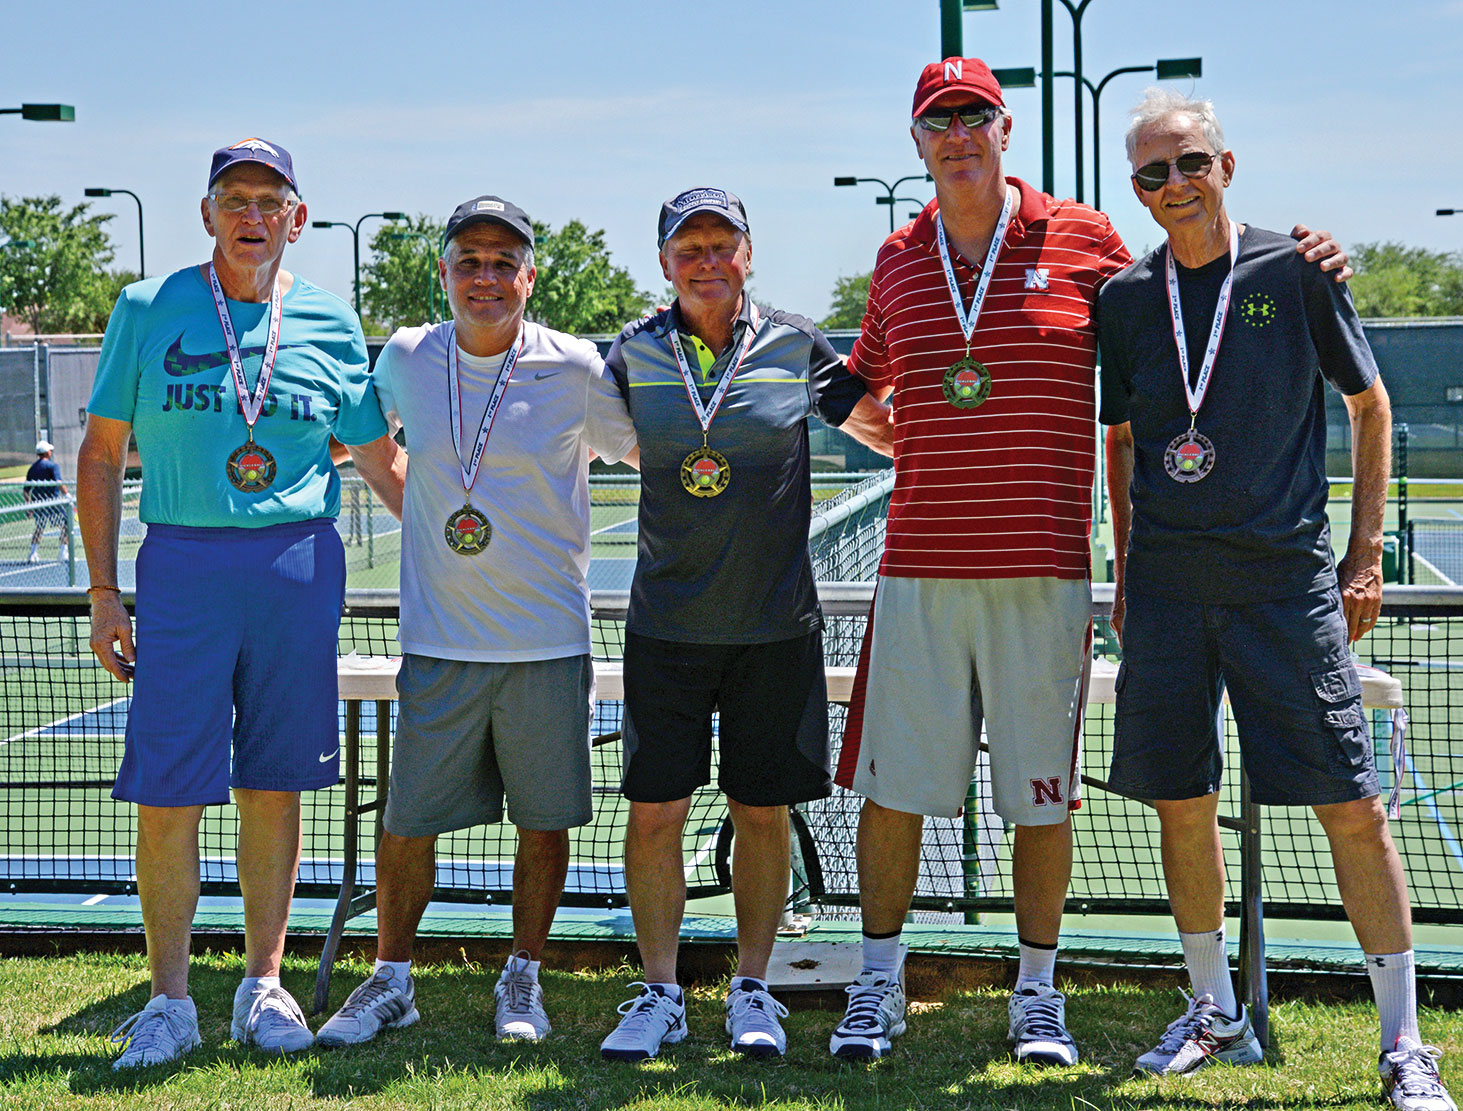 Division C winners, left to right: Glenn Kuykendall, Kawika Cotner, Jim Mitchell, Tom Roth and Mike Lock. Dave Parker is not shown.